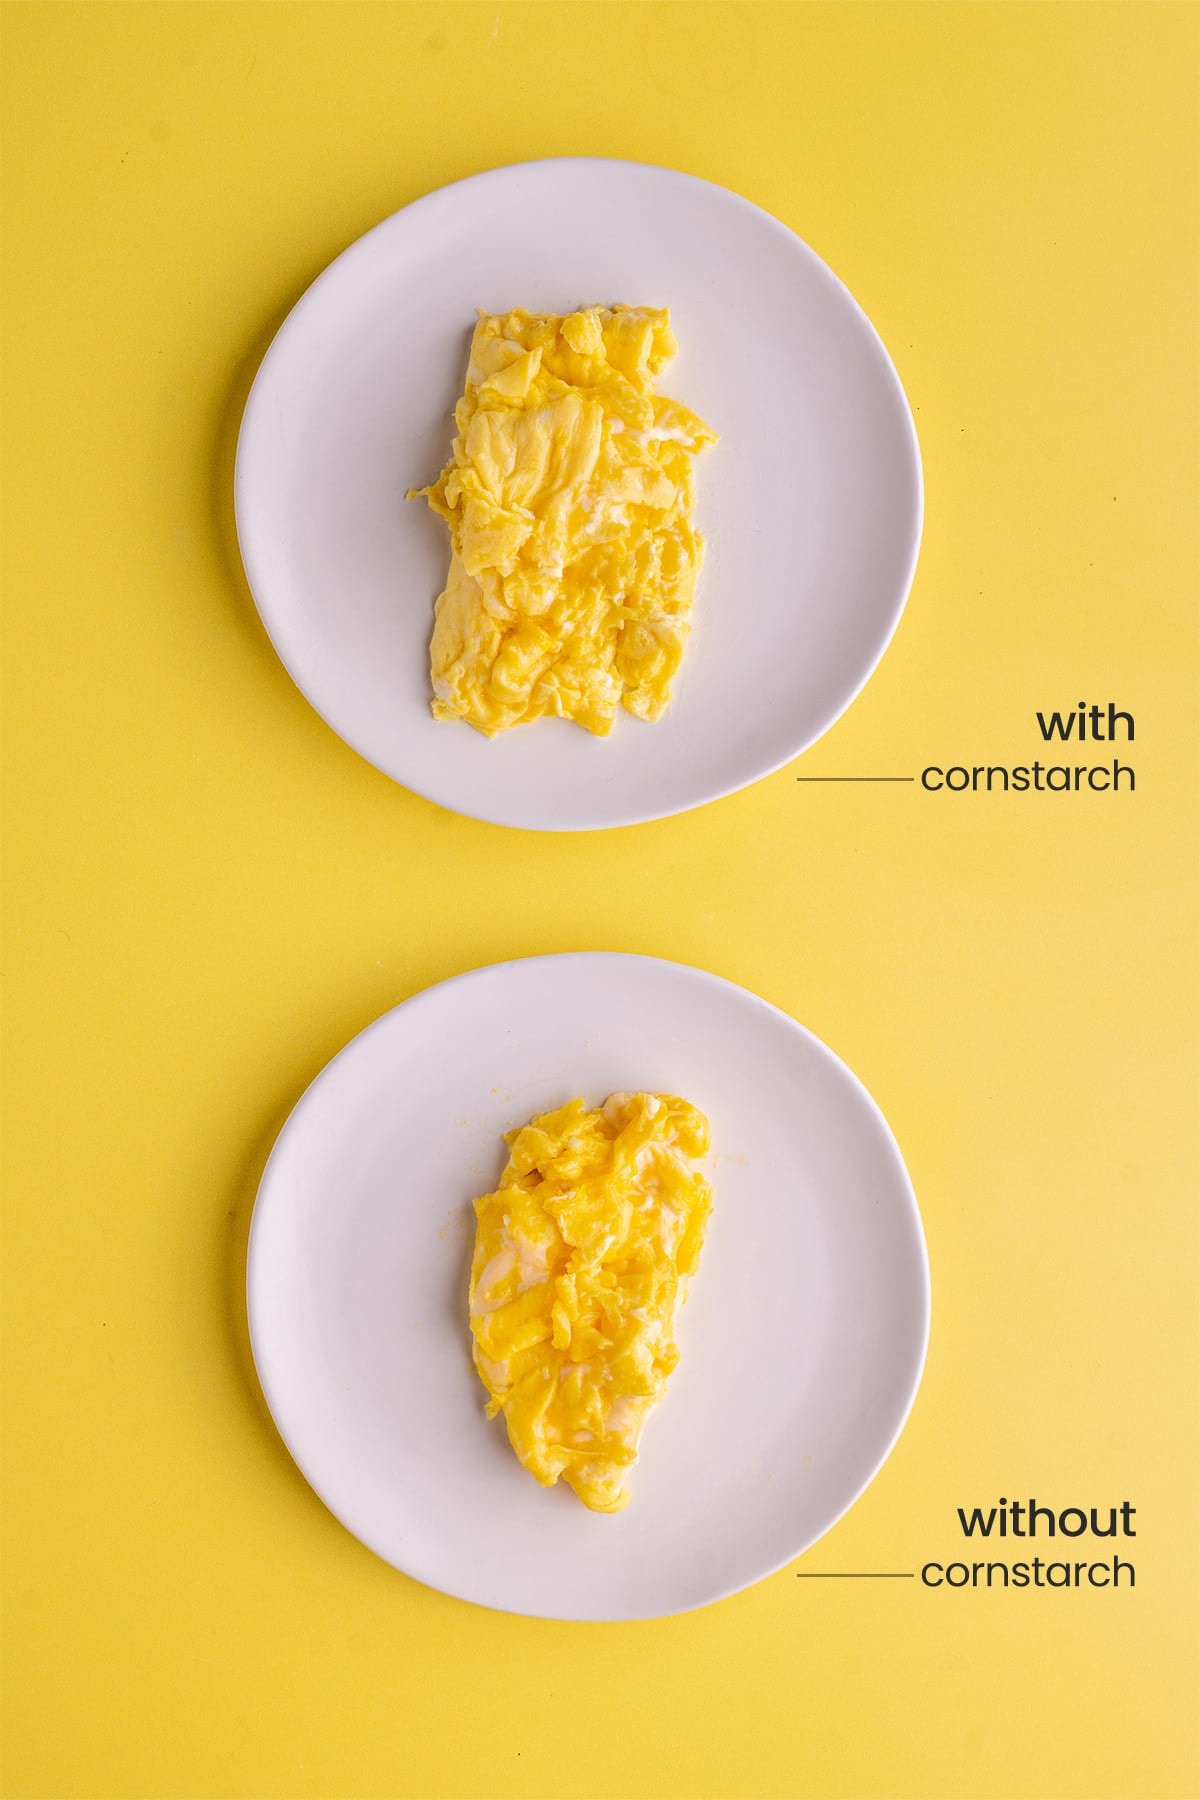 Soft scrambled eggs made with and without a cornstarch slurry